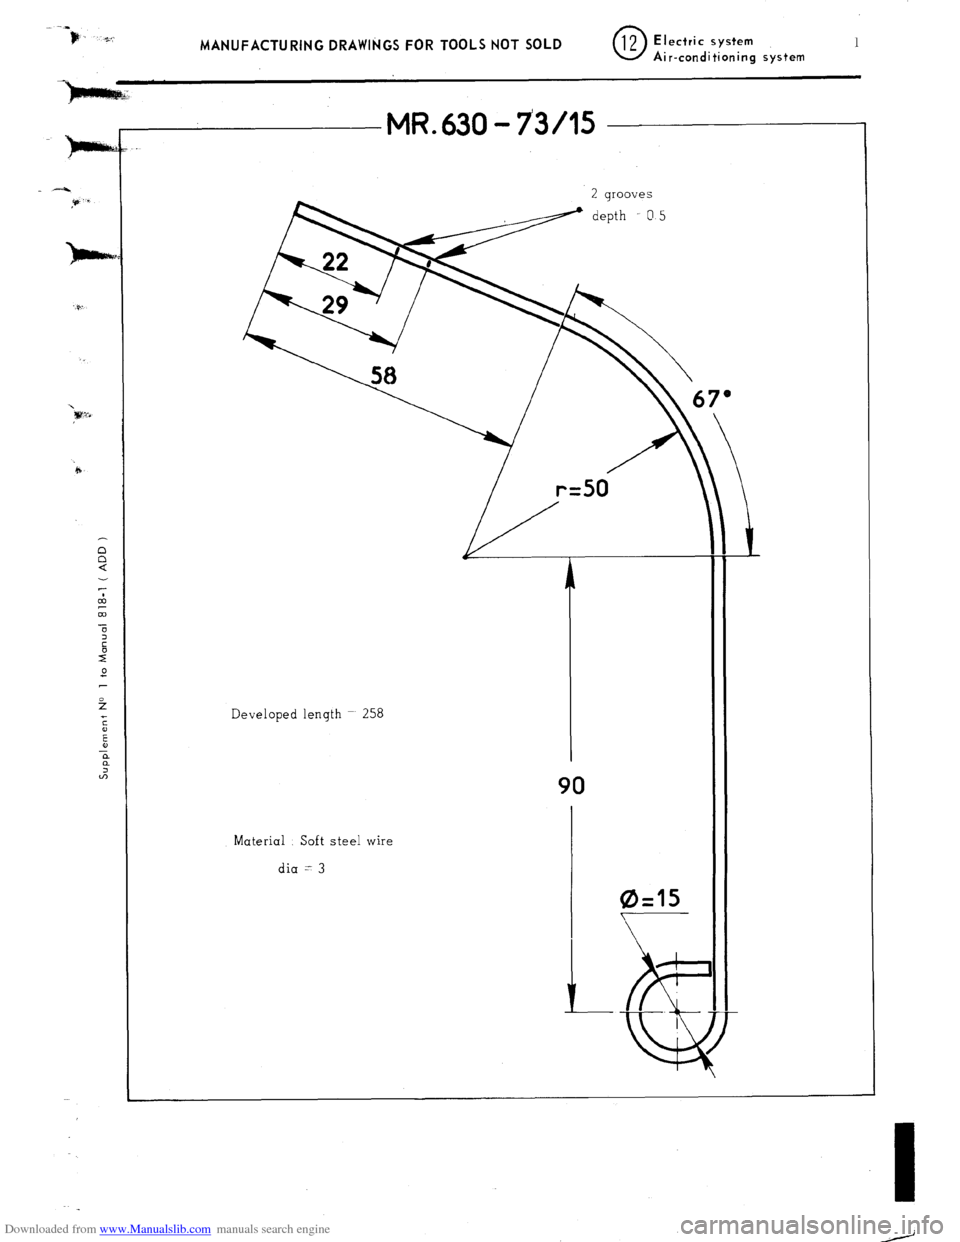 Citroen CX 1984 1.G Workshop Manual Downloaded from www.Manualslib.com manuals search engine MANUFACTURING DRAWINGS FOR TOOLS NOT SOLD 0 12 Electric system 1 Air-conditioning system n 
n 
a 
MR. 630 - 7305 
Developed length ~ 258 
Mater